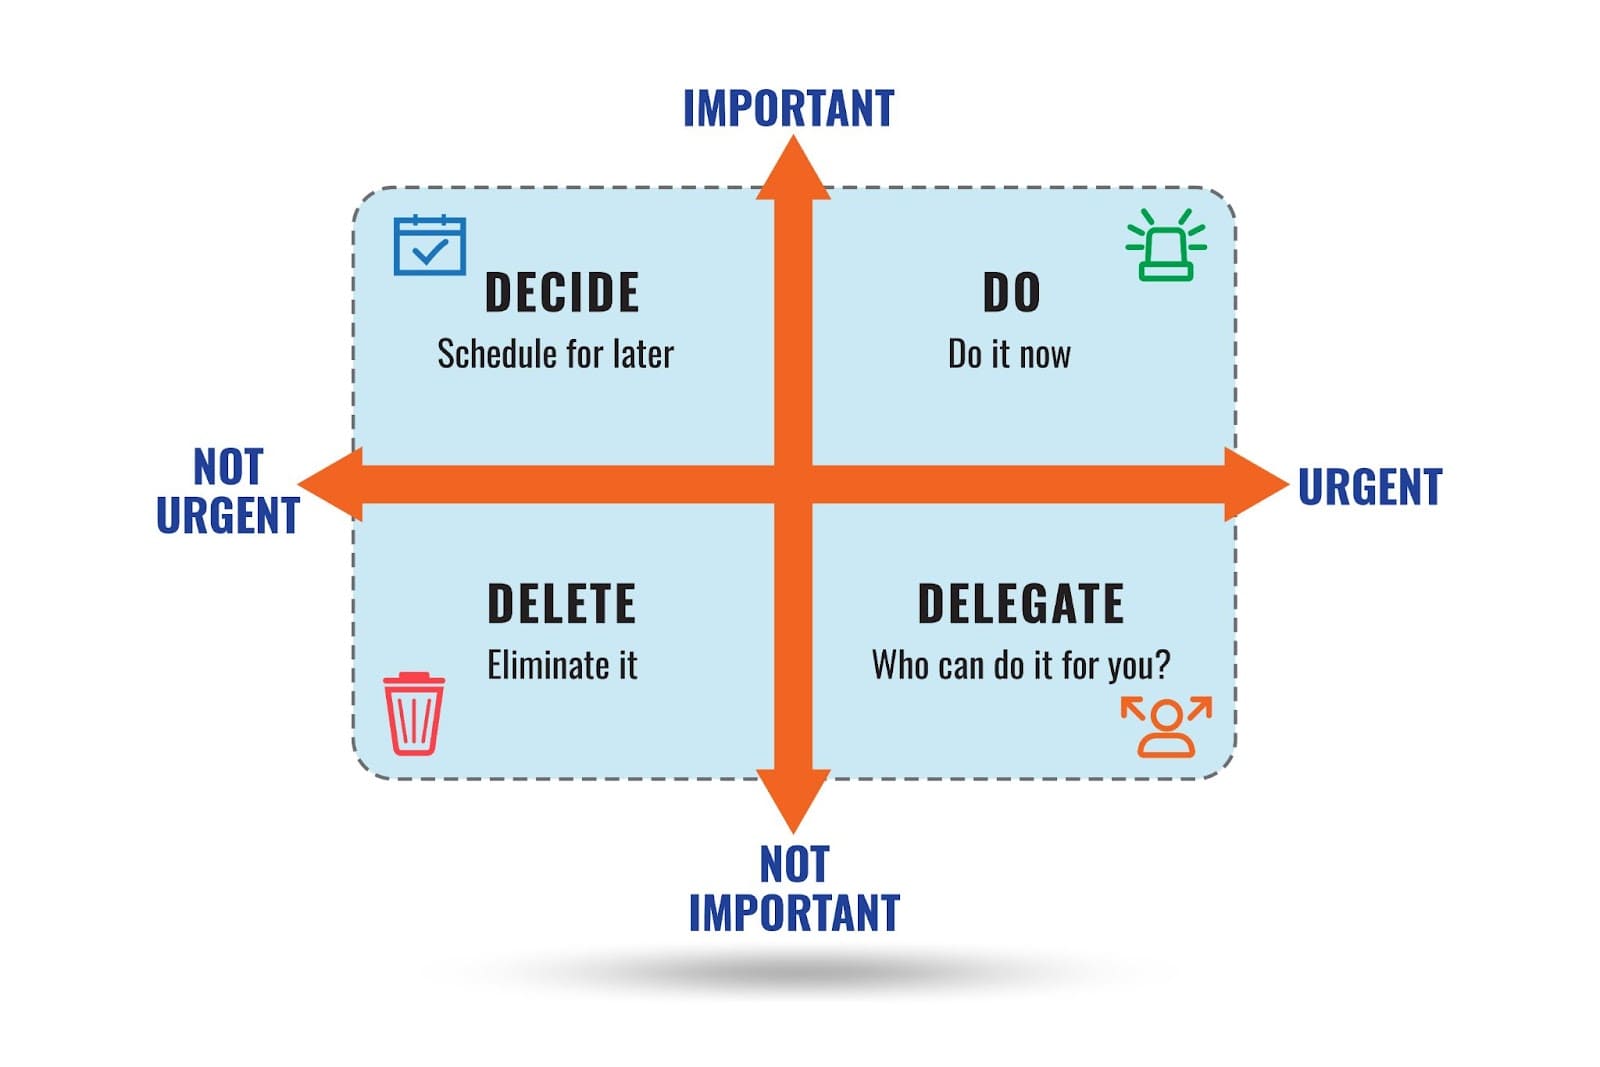 Image demonstrating the Eisenhower matrix, a time management tool, categorizing tasks into urgent and important quadrants for effective prioritization.